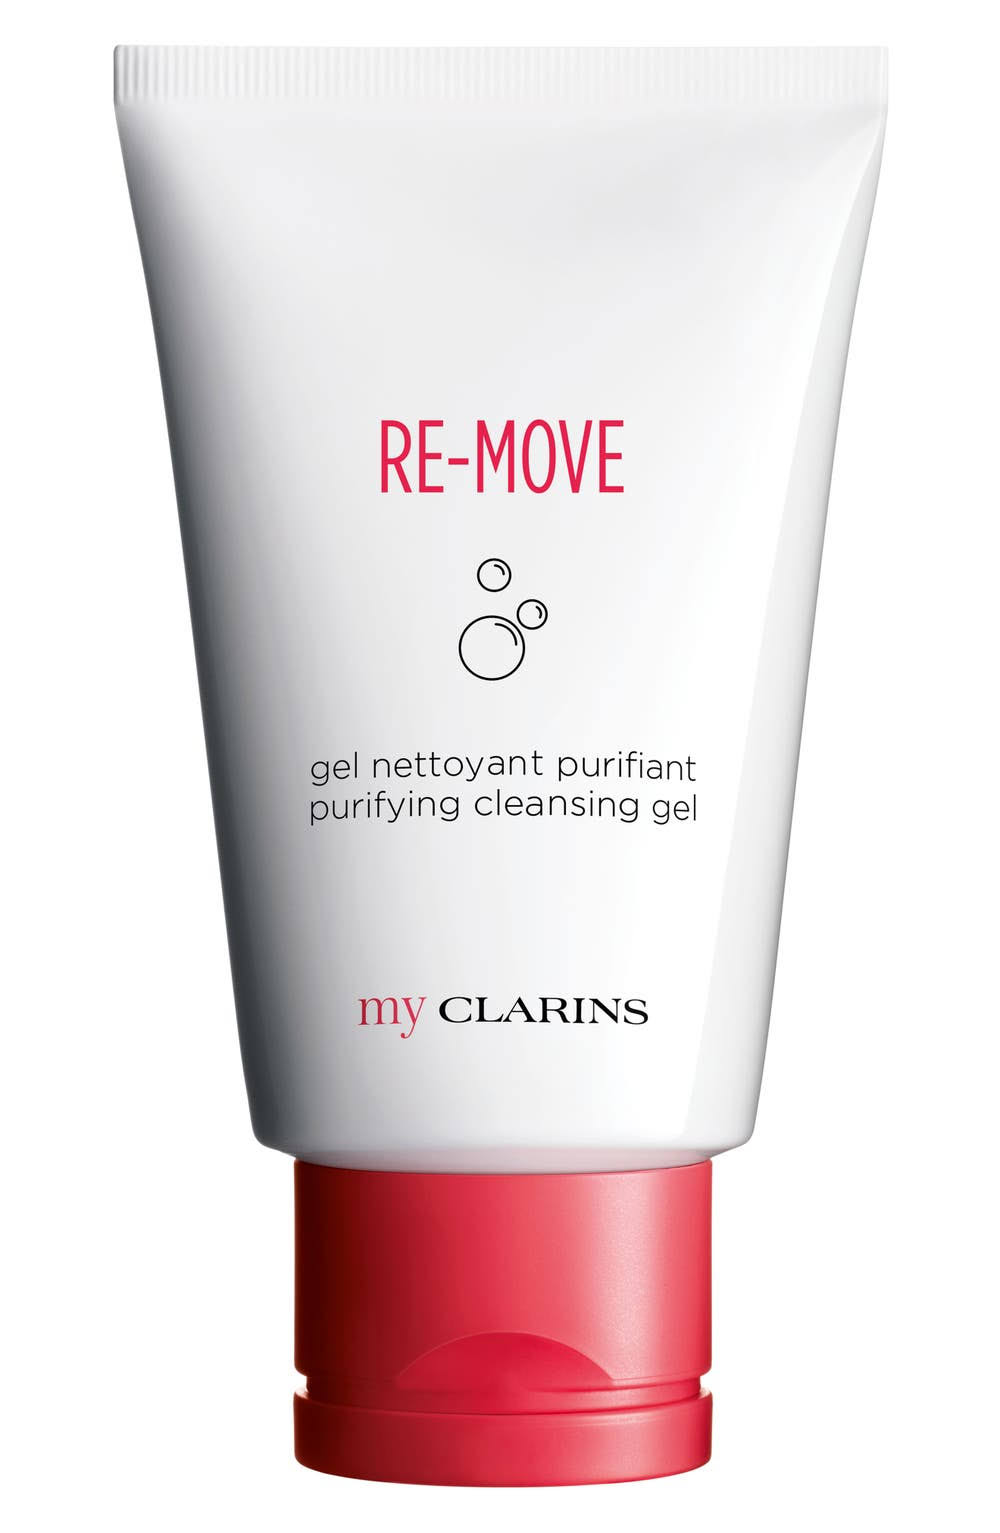 My Clarins Re-Move Purifying Cleansing Gel, 125 ml